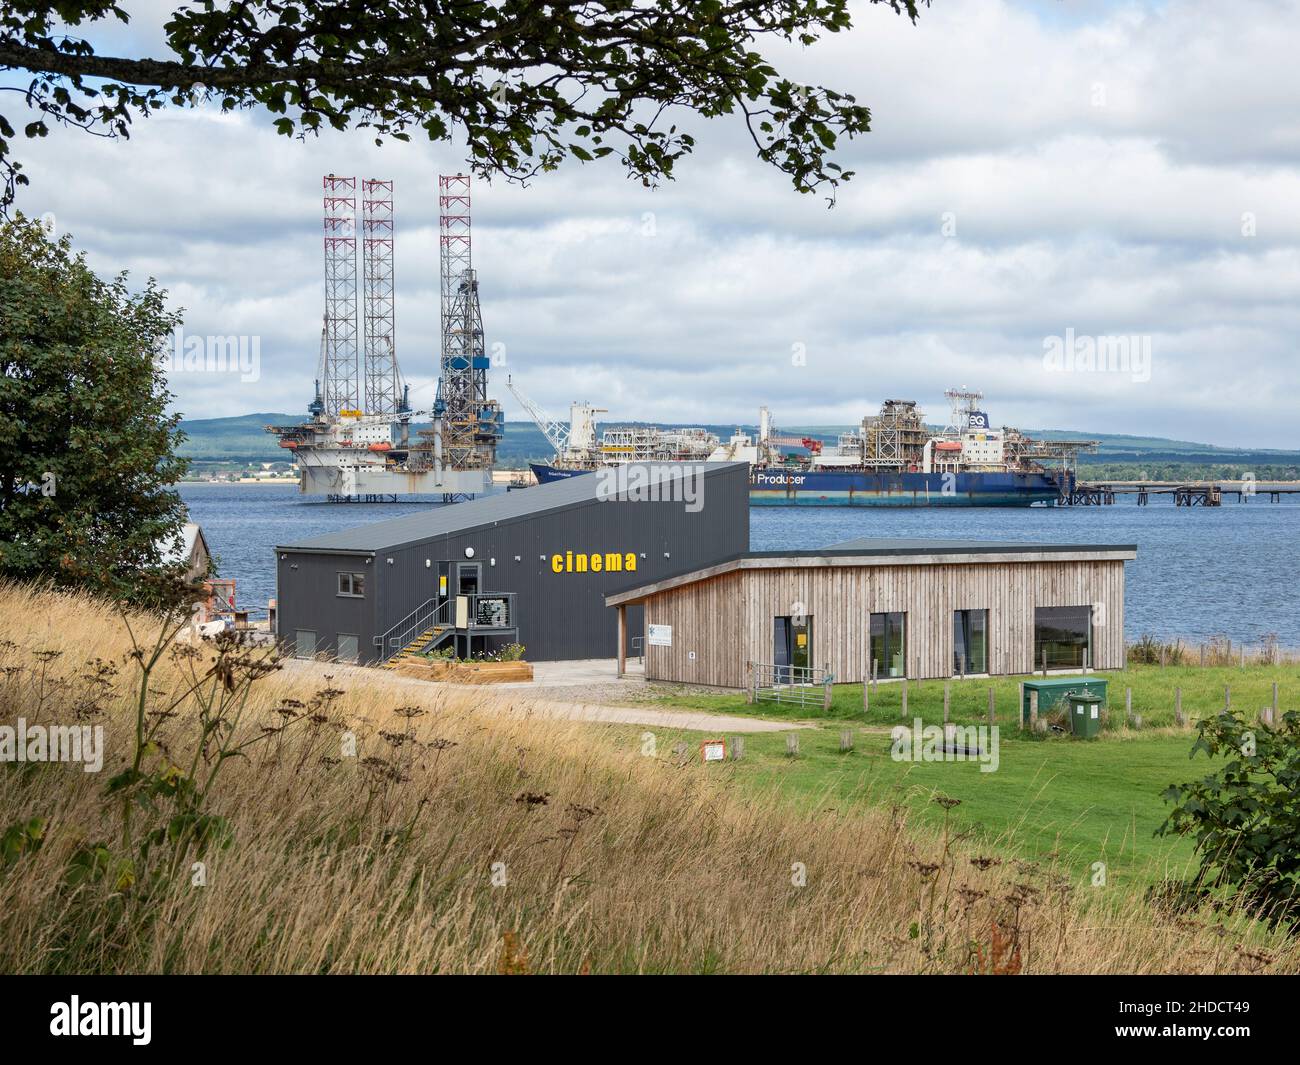 The Cinema and Cromarty Links Hub Buildings with Oil Platform and ship behind. Cromarty, Black Isle, Highland, Schottland Stockfoto